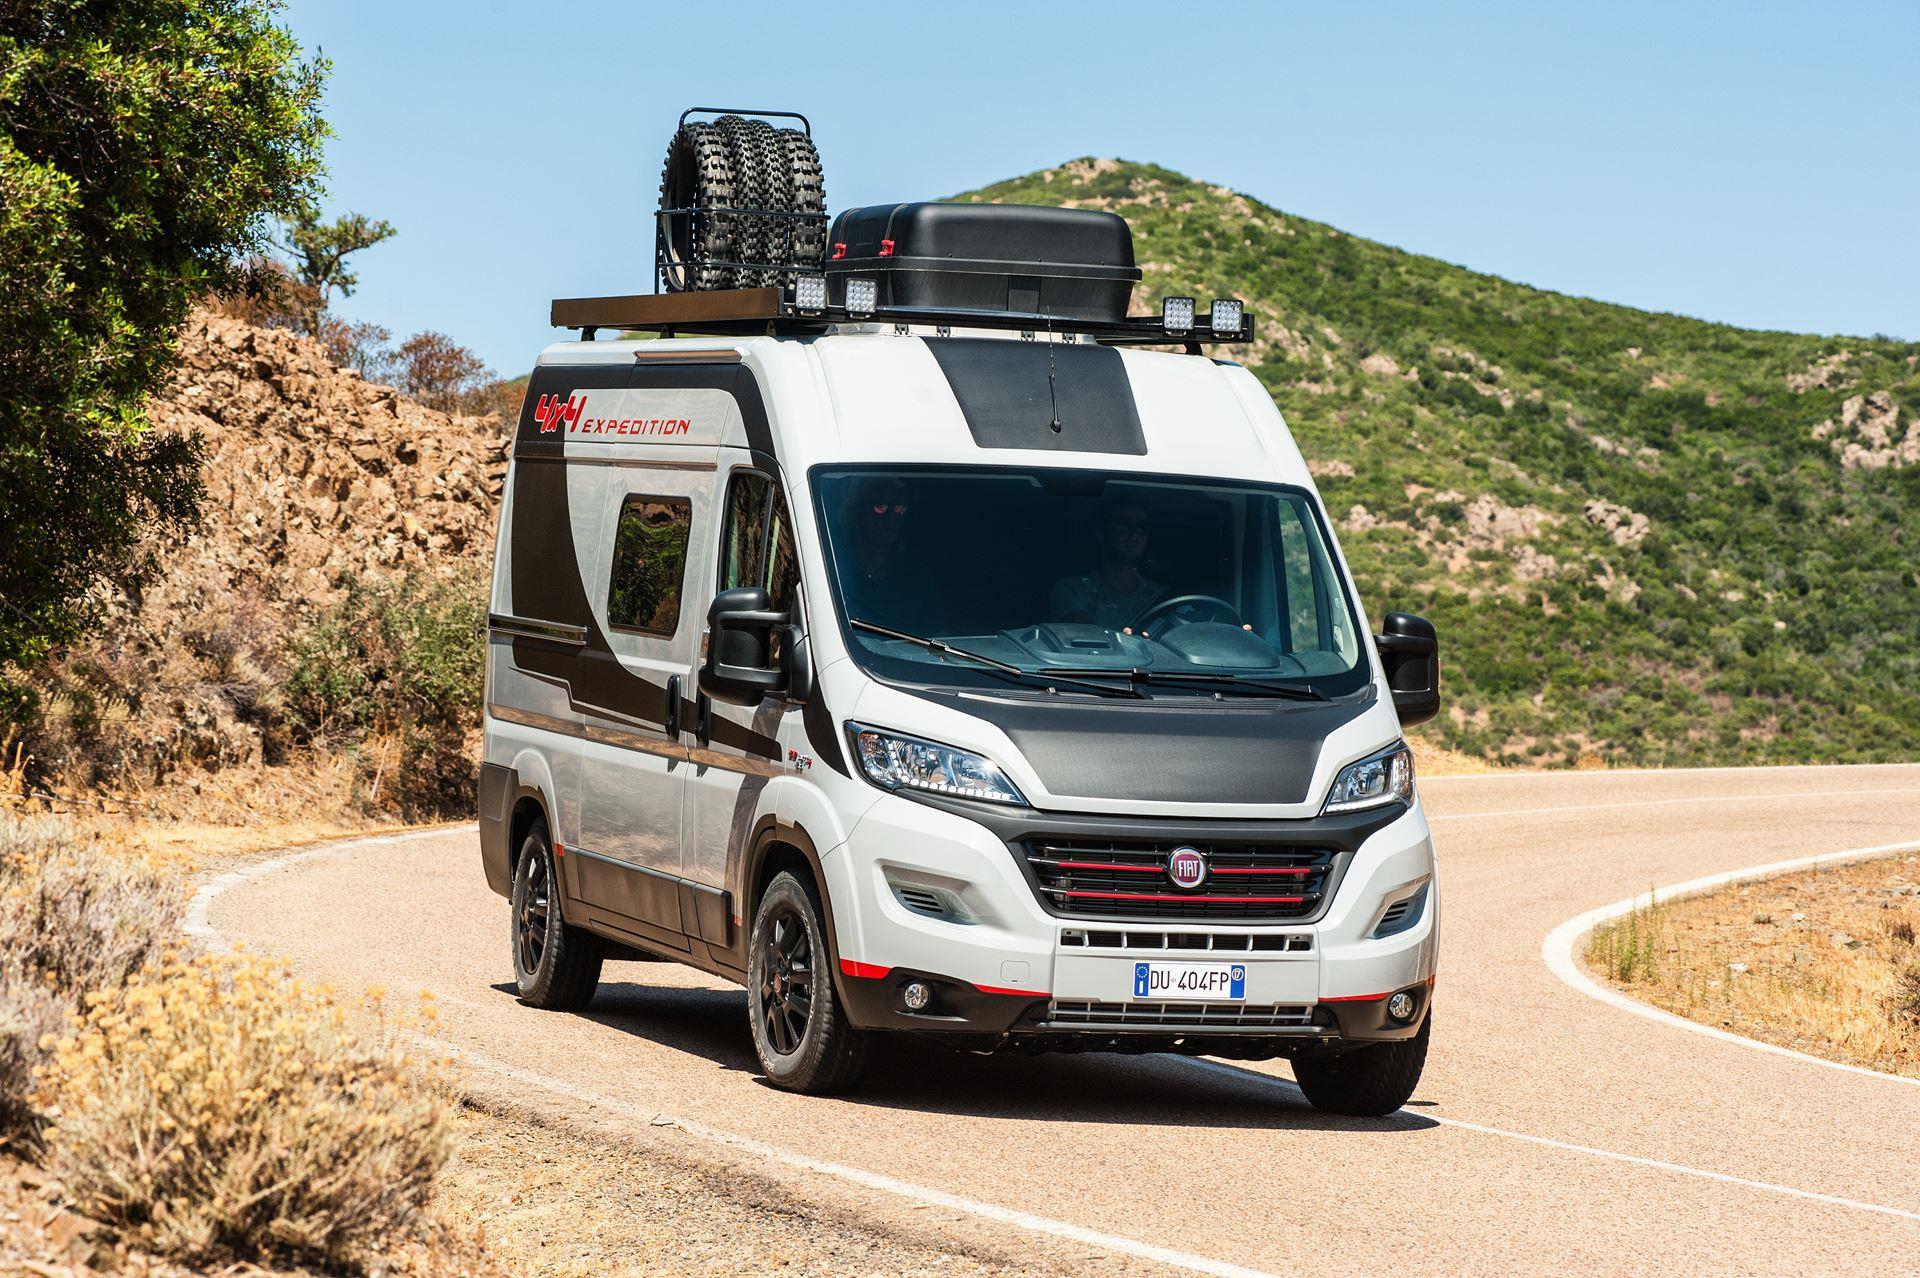 ducato 4x4 expedition for sale